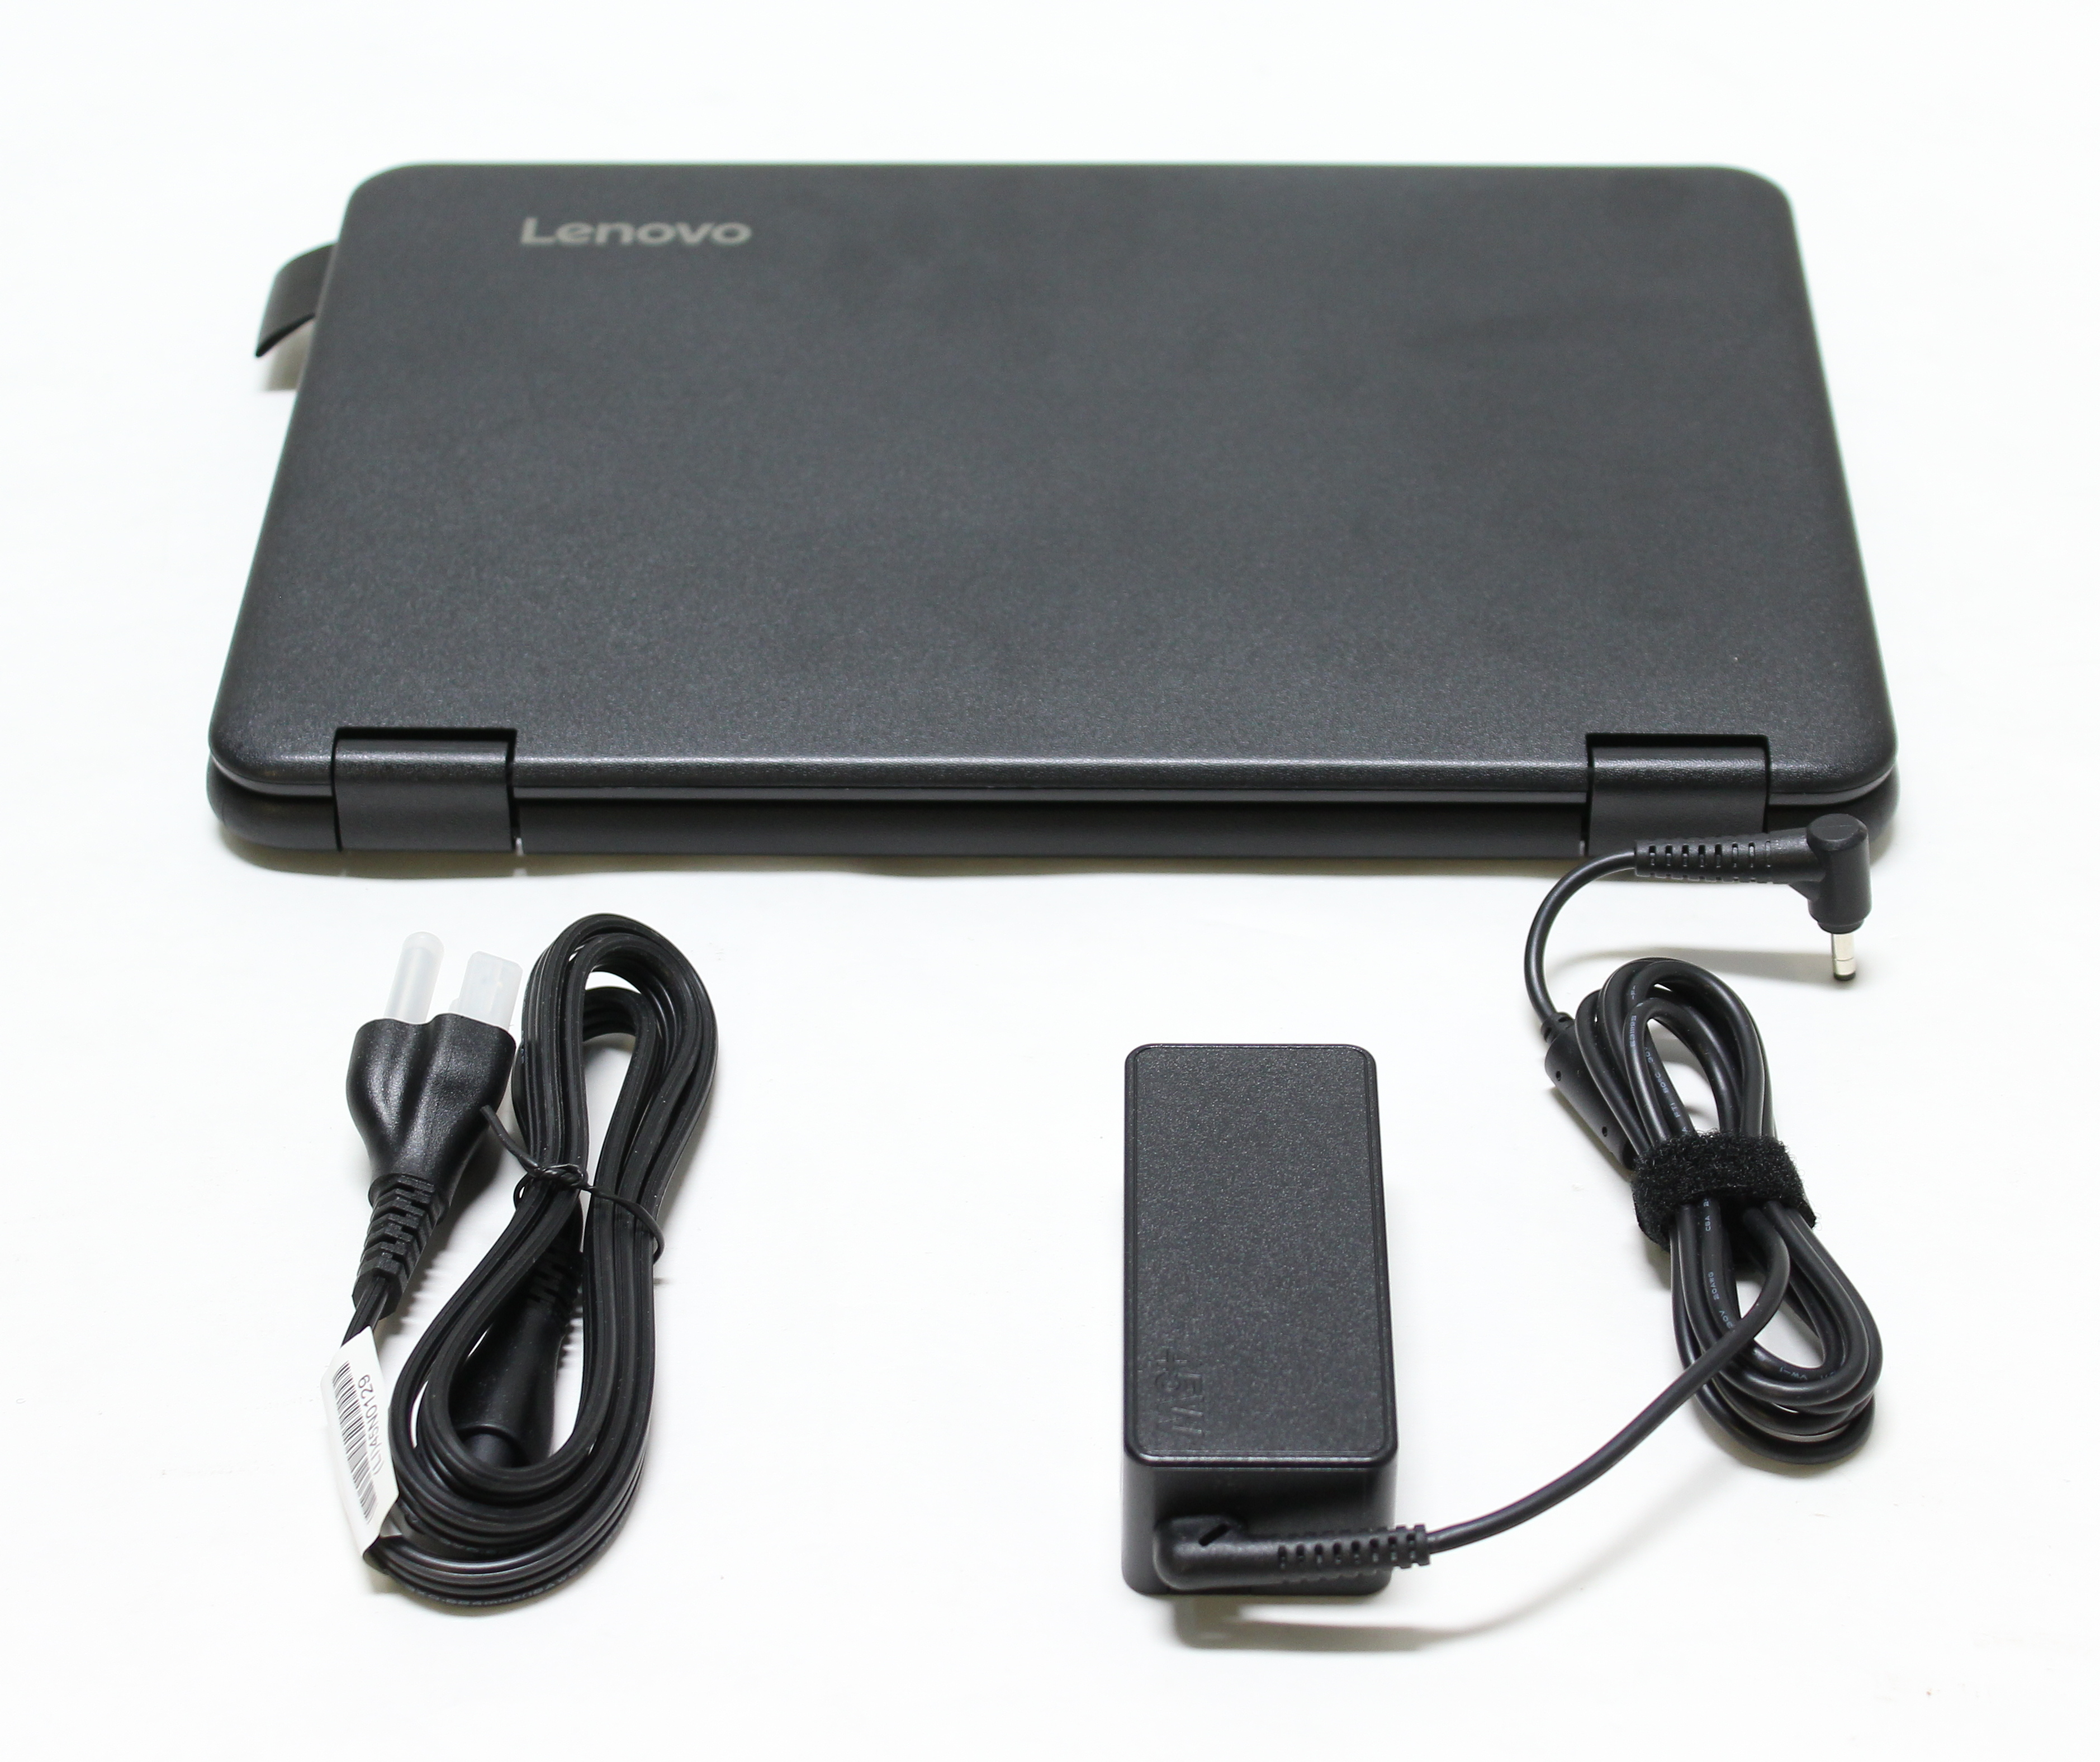 Lenovo 300e Winbook 11.6" Touchscreen LCD 2 in 1 Notebook CPU N3450 1.1GHZ RAM 4GB SANDISK 64GB 81FY000SUS - Click Image to Close